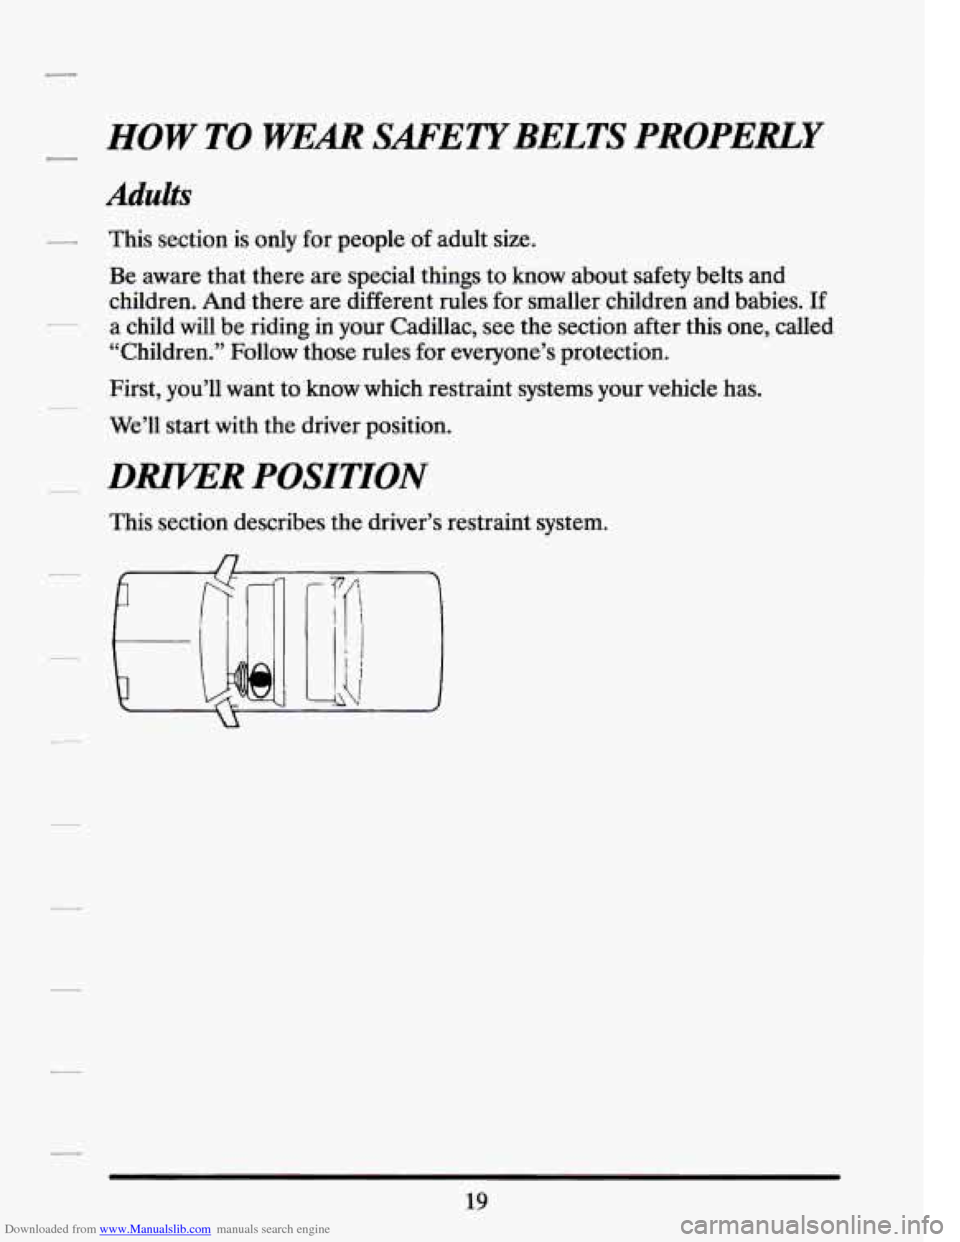 CADILLAC SEVILLE 1994 4.G Owners Manual Downloaded from www.Manualslib.com manuals search engine II HOW TO WEM SAFETYBELTS PROPERLY 
Adults 
- This section is  only for  people of adult size. 
Be aware  that  there  are  special  things to 